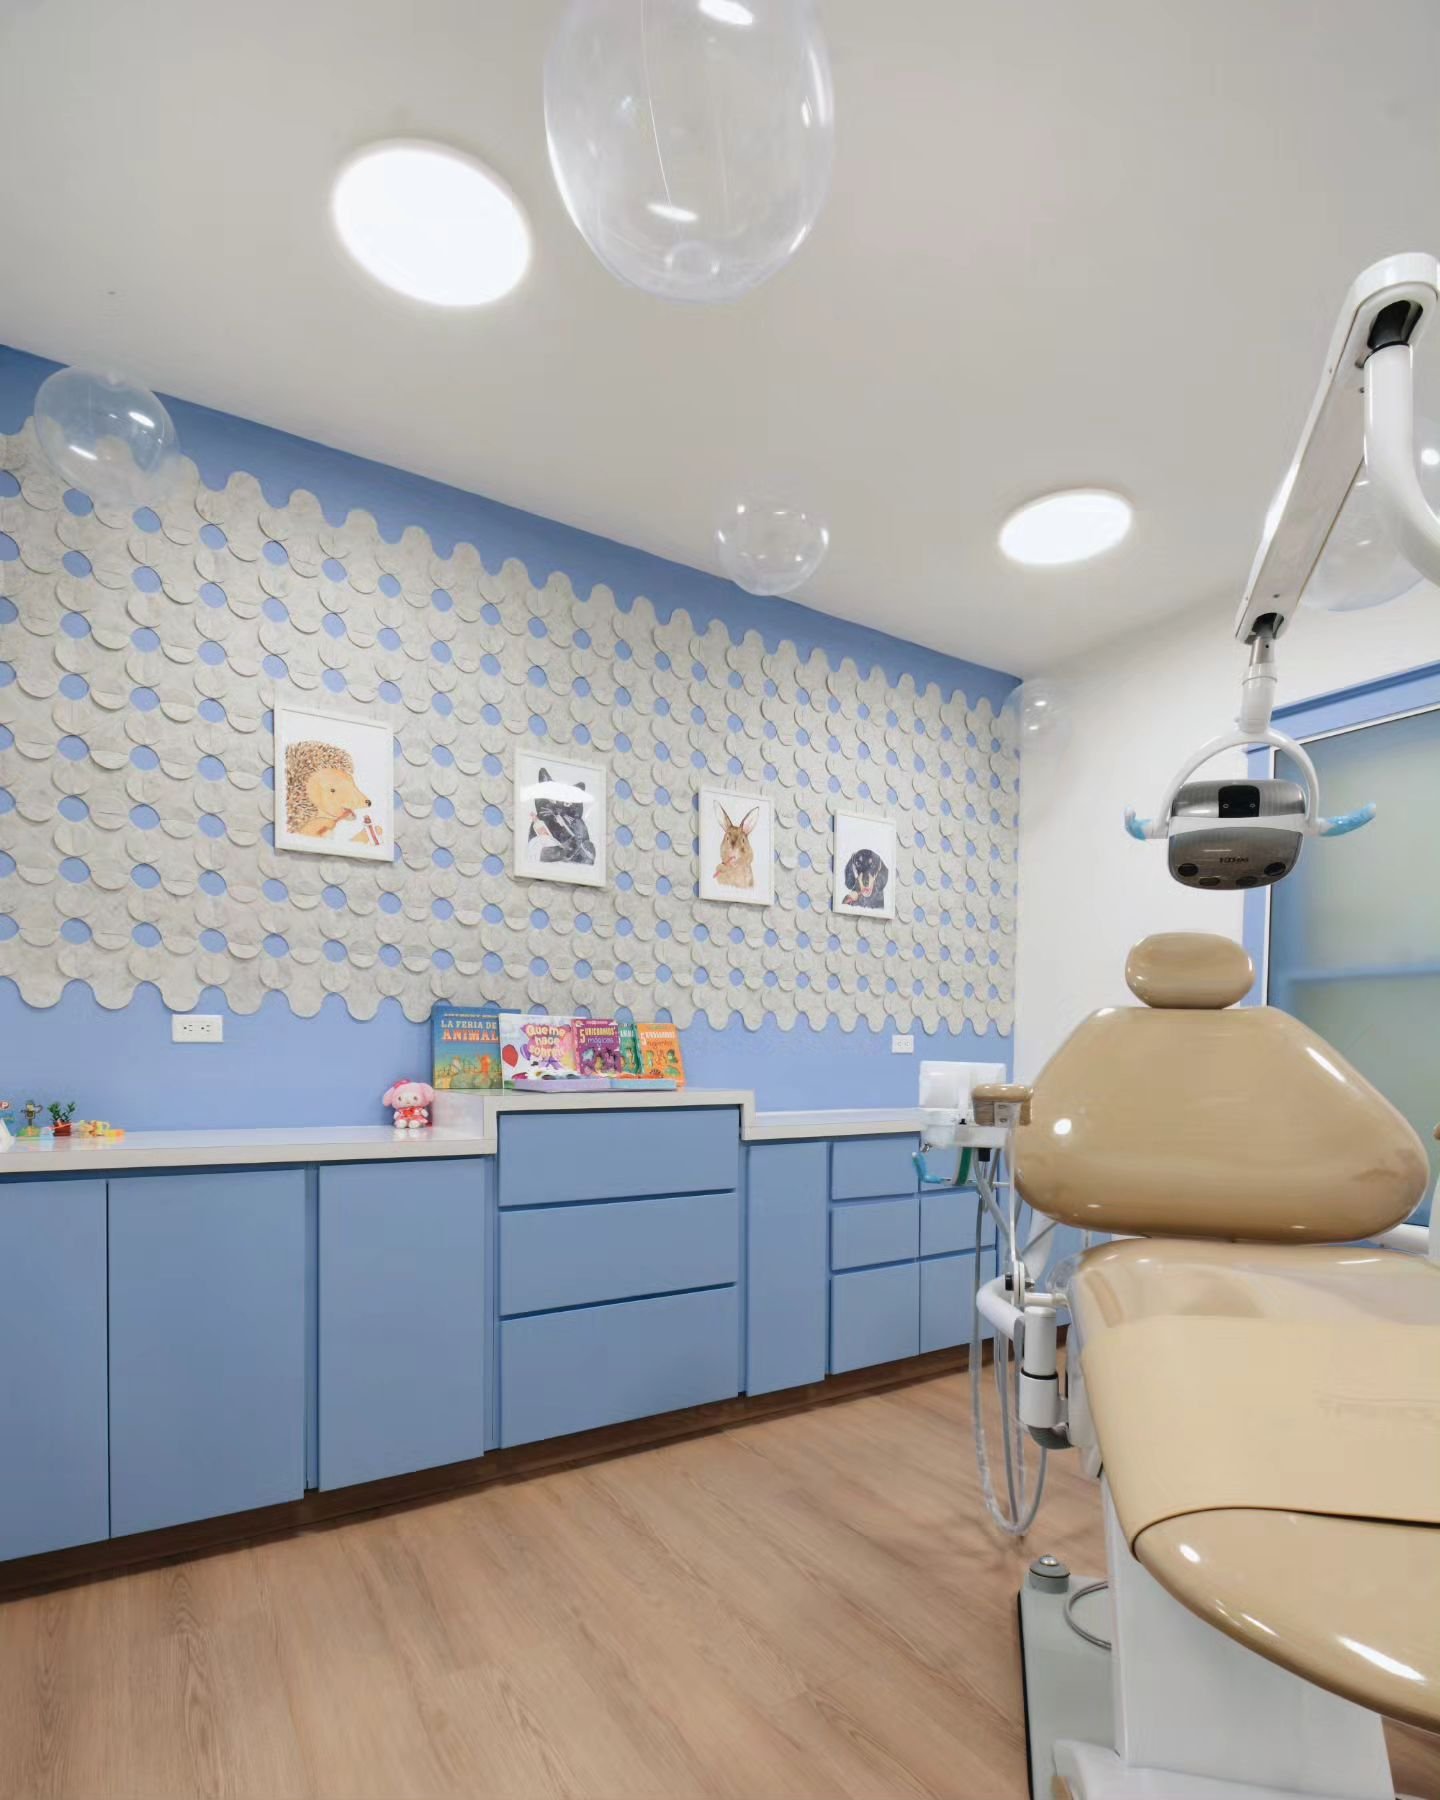 QUE ME HACE SONREIR - Pediatric Dentistry 

The open spaces facilitate lighting, ventilation and visually enlarges the space; however this can also cause echo and excessive noise; for this reason, it was proposed to place acoustic panels designed wit